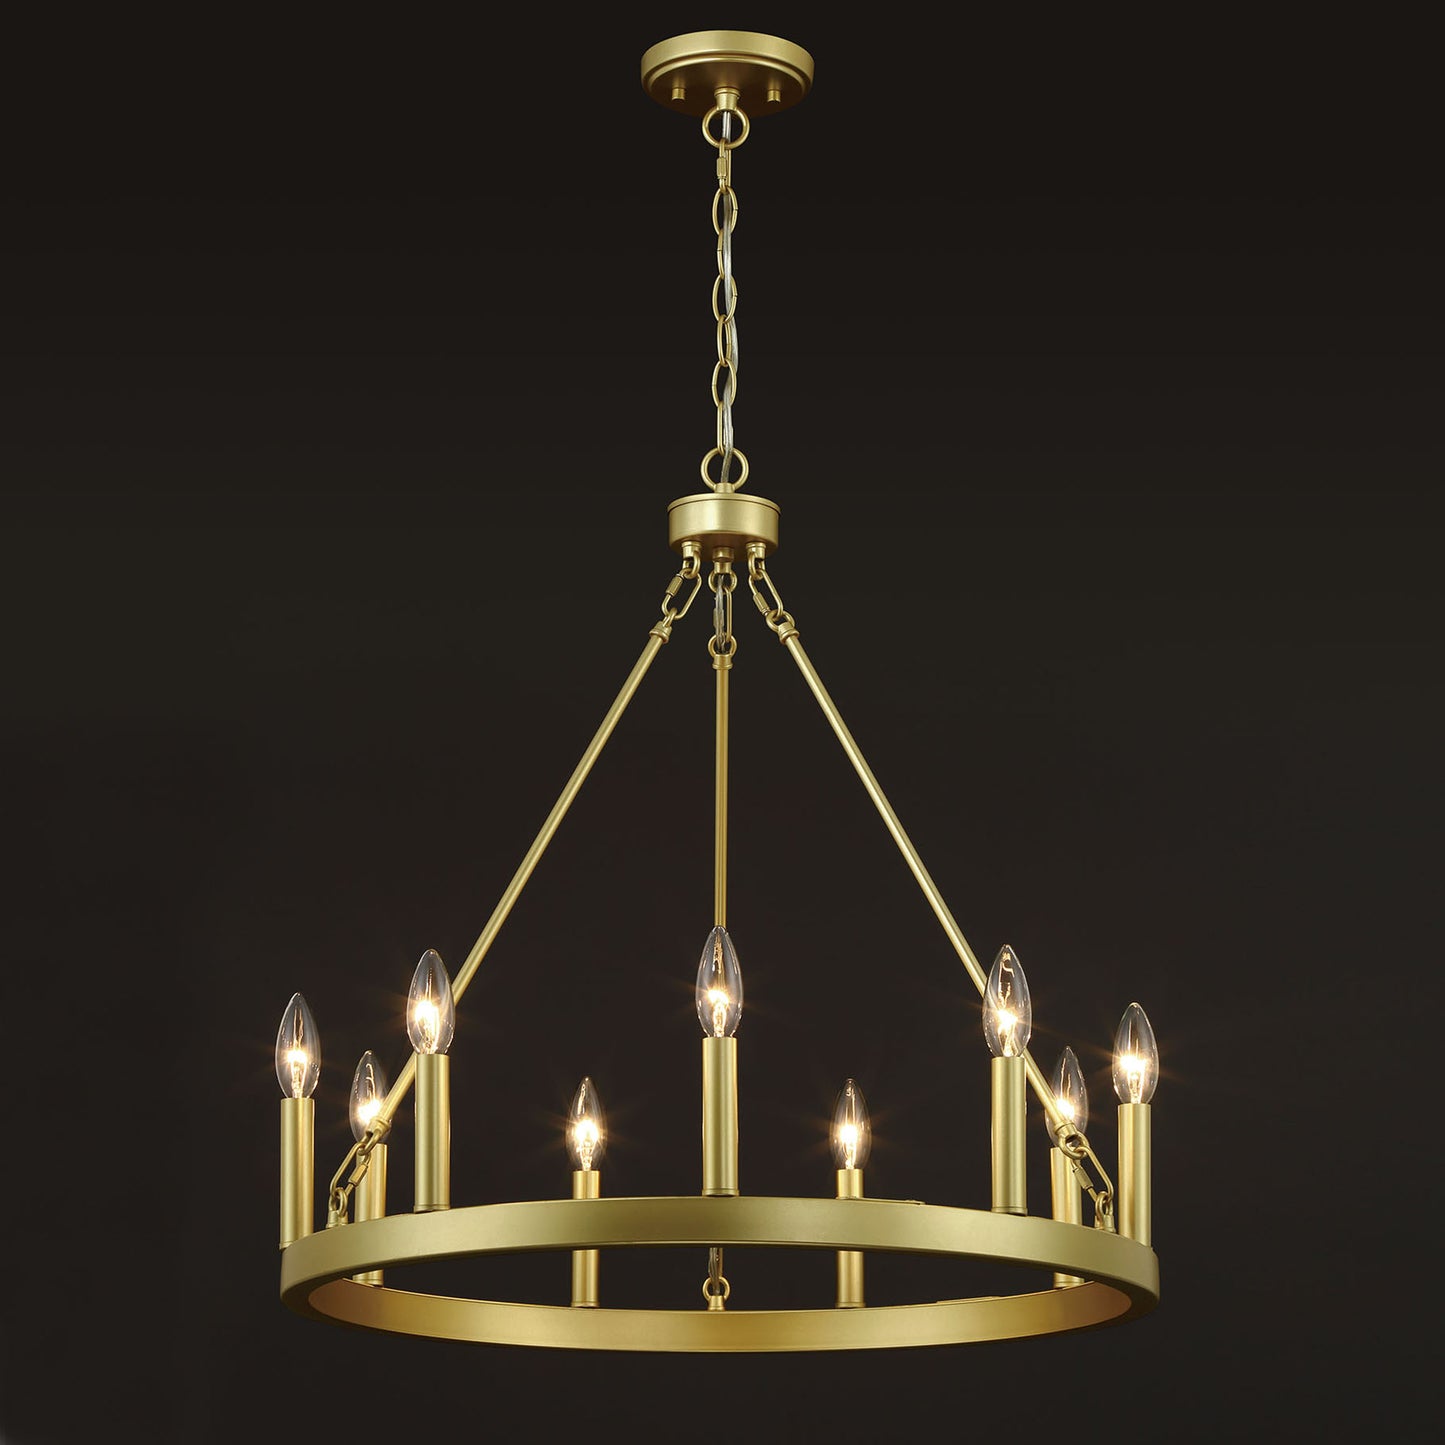 9-Light Candle Style Wagon Wheel Chandelier UL Listed